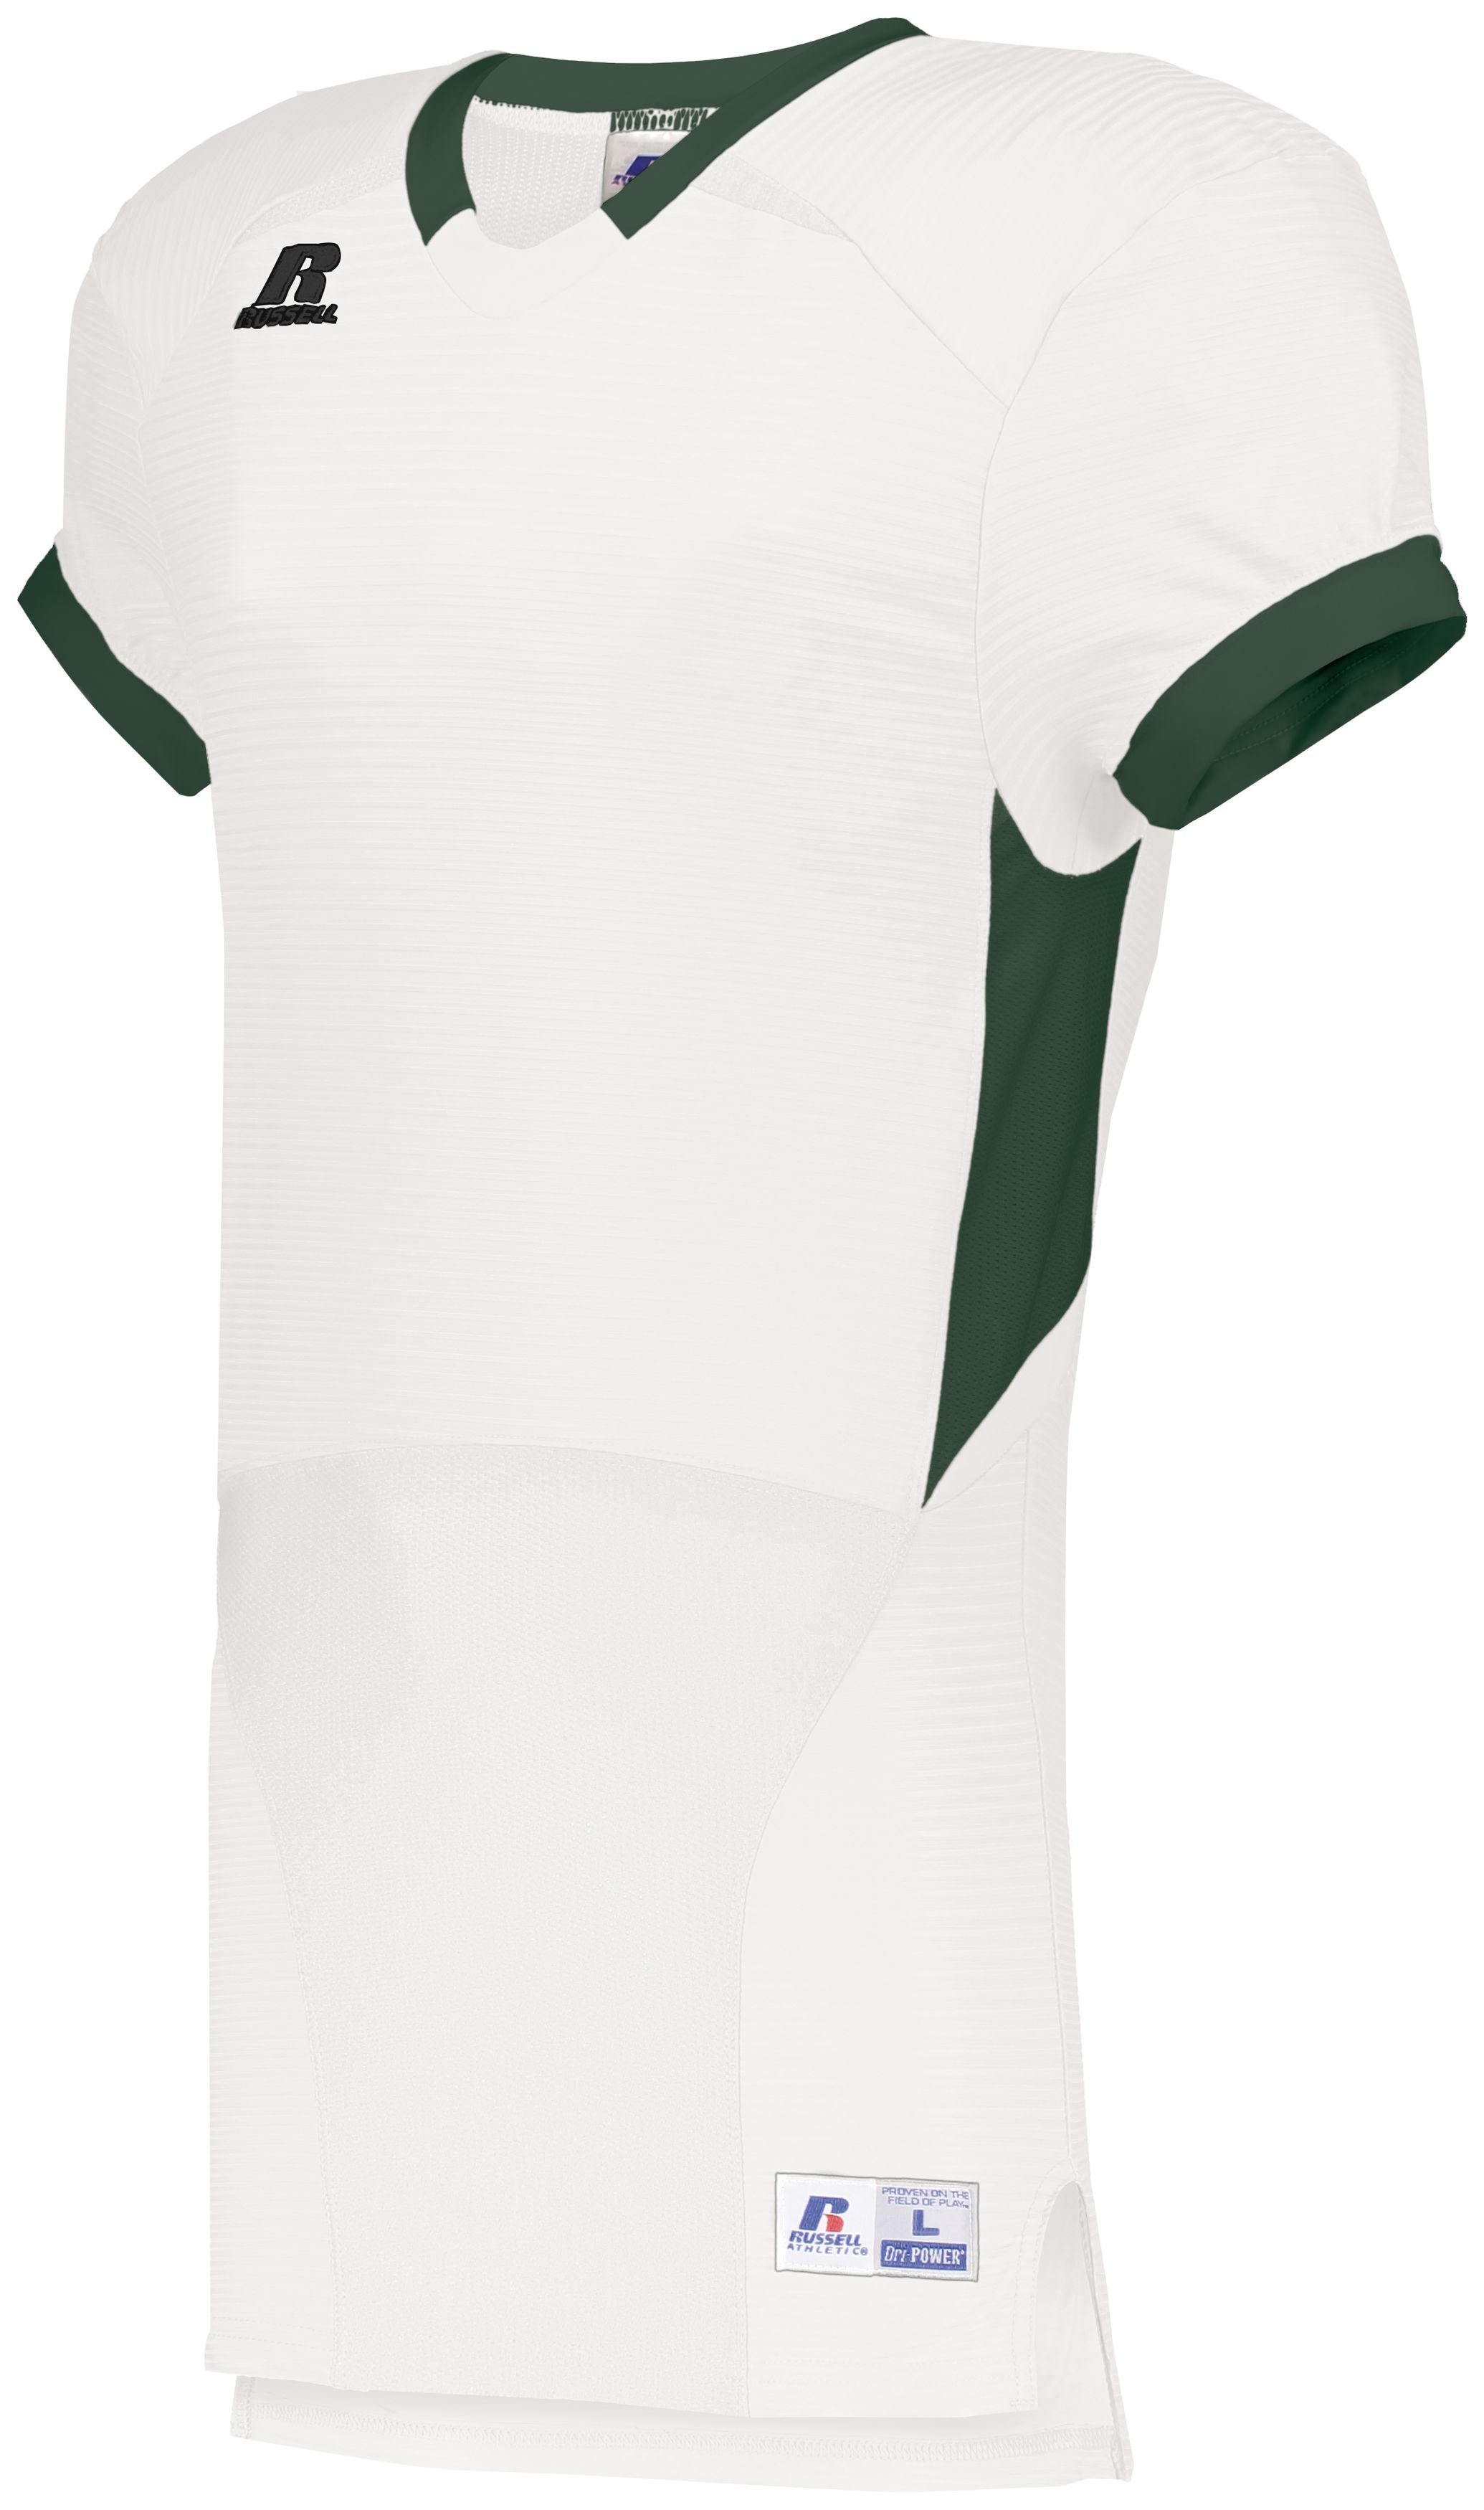 Russell Athletic Color Block Game Jersey in White/Dark Green  -Part of the Adult, Adult-Jersey, Football, Russell-Athletic-Products, Shirts, All-Sports, All-Sports-1 product lines at KanaleyCreations.com